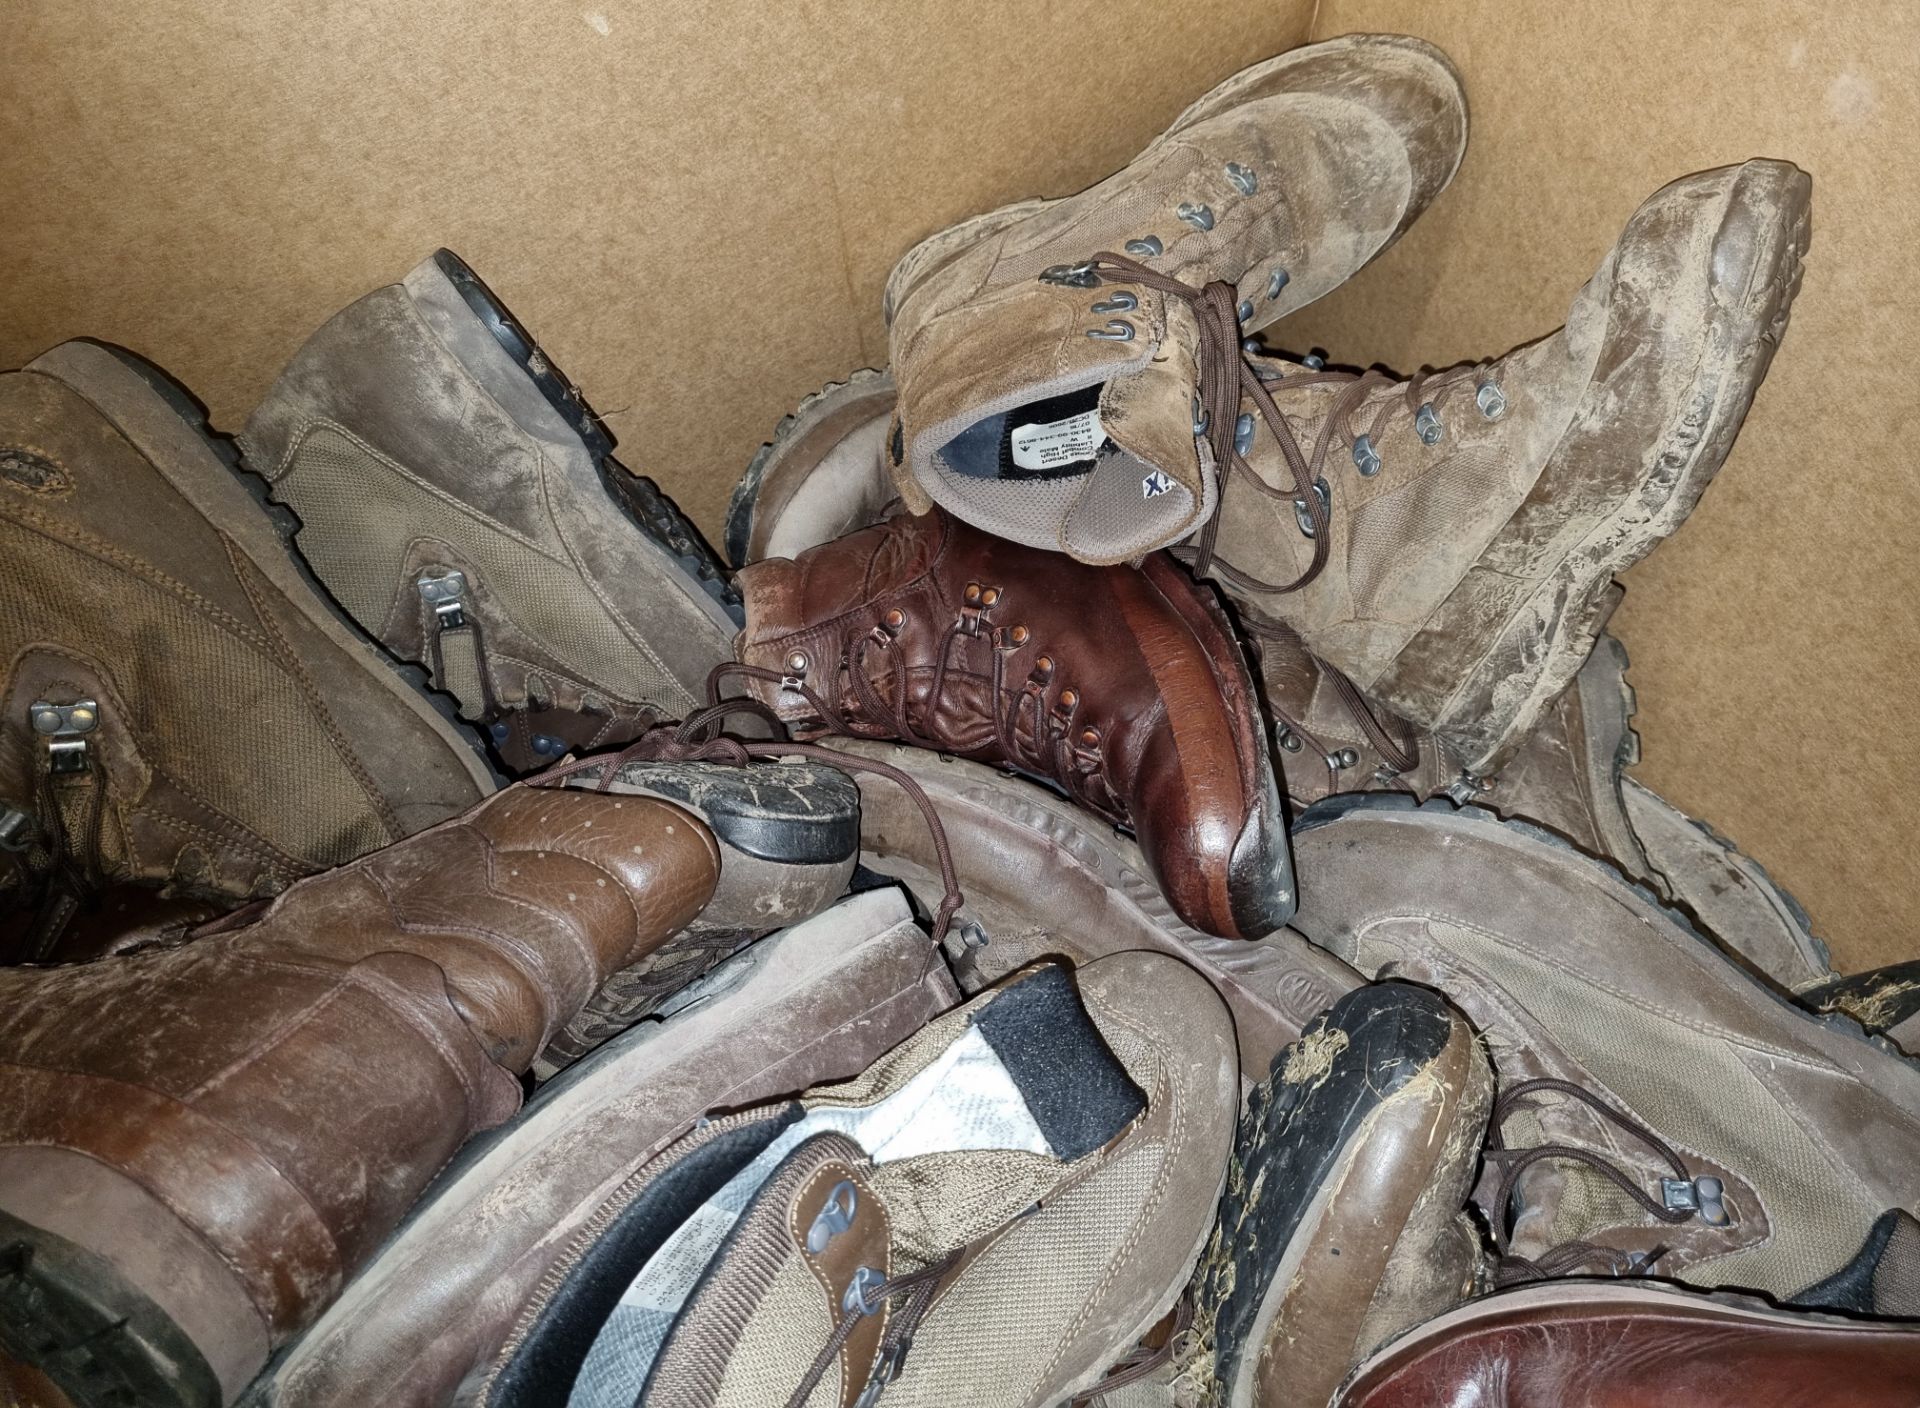 50x pairs of Various Boots including Magnum, Iturri & YDS - mixed grades and sizes - Image 3 of 5